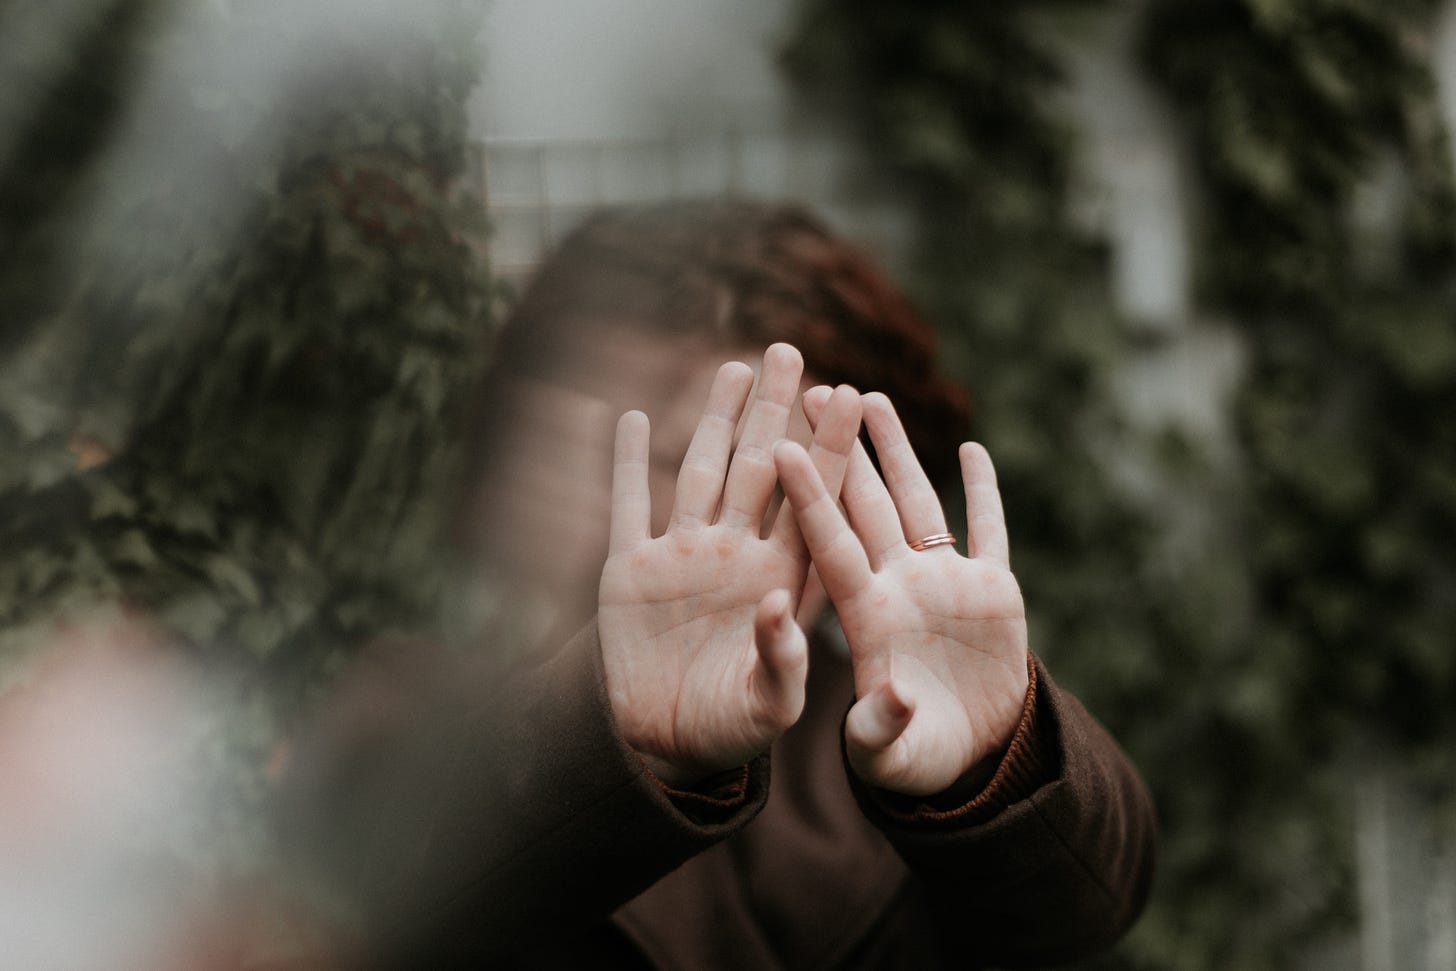 Two hands are palms out towards the camera, with a few fingers intertwined. The background is blurry with some greenery and the face of the person whose hands are outstrecthed.